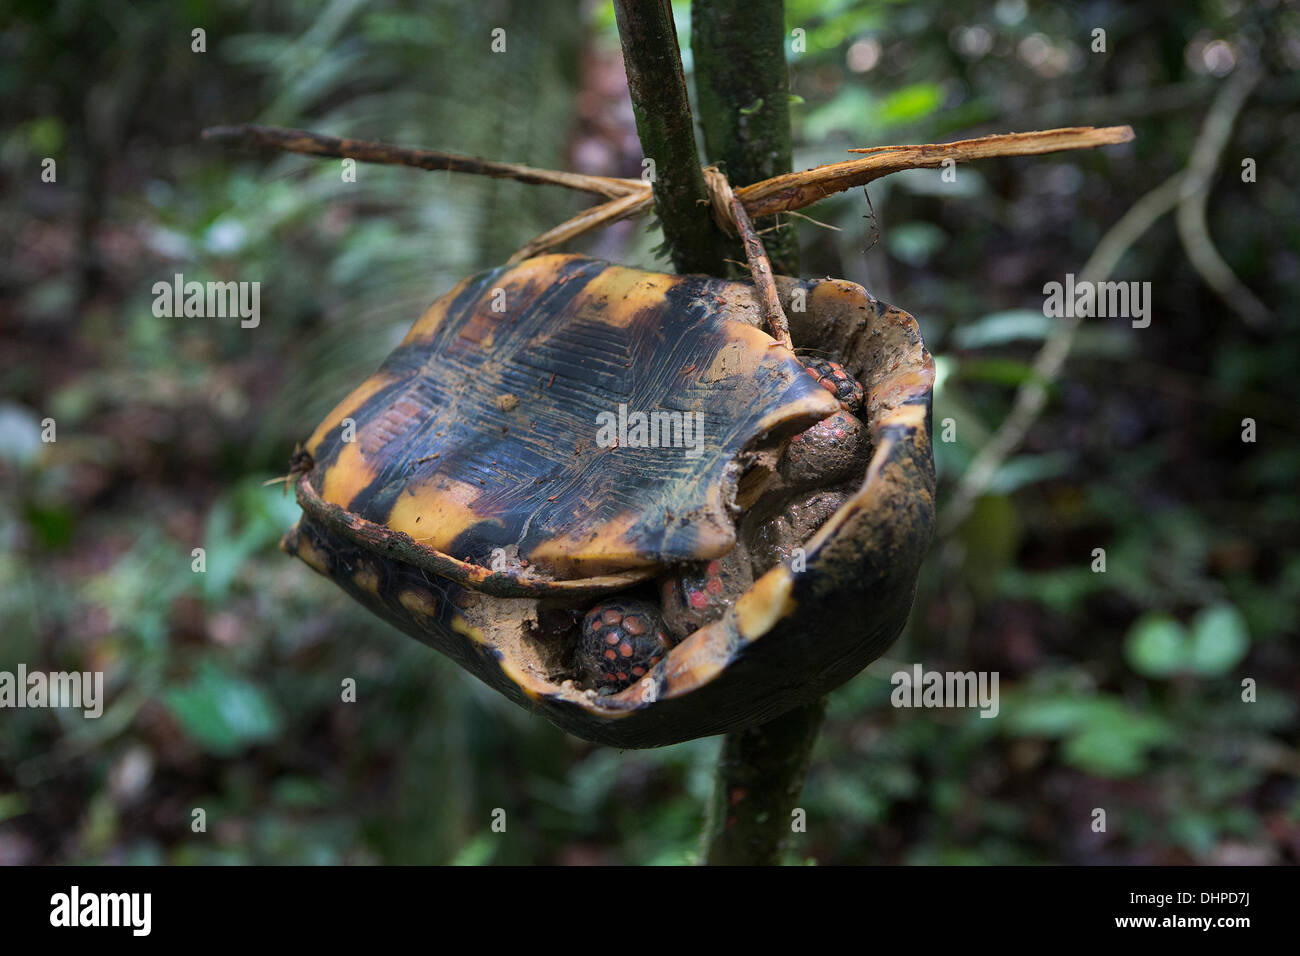 April 27, 2013 - Poti-Kro, Para, Brazil - Jabuti, a type of land turtle, is considered easy game. When hunters come across a jabuti, they tie it with bark or vine to a tree to be collected on their way back home. The indigenous Xikrin people live on the Bacaja, a tributary of the Xingu River, where construction of the Belo Monte Dam is reaching peak construction. Some scientists warn that the water level of the Bacaja will decrease precipitously due to the dam. (Credit Image: © Taylor Weidman/ZUMA Wire/ZUMAPRESS.com) Stock Photo